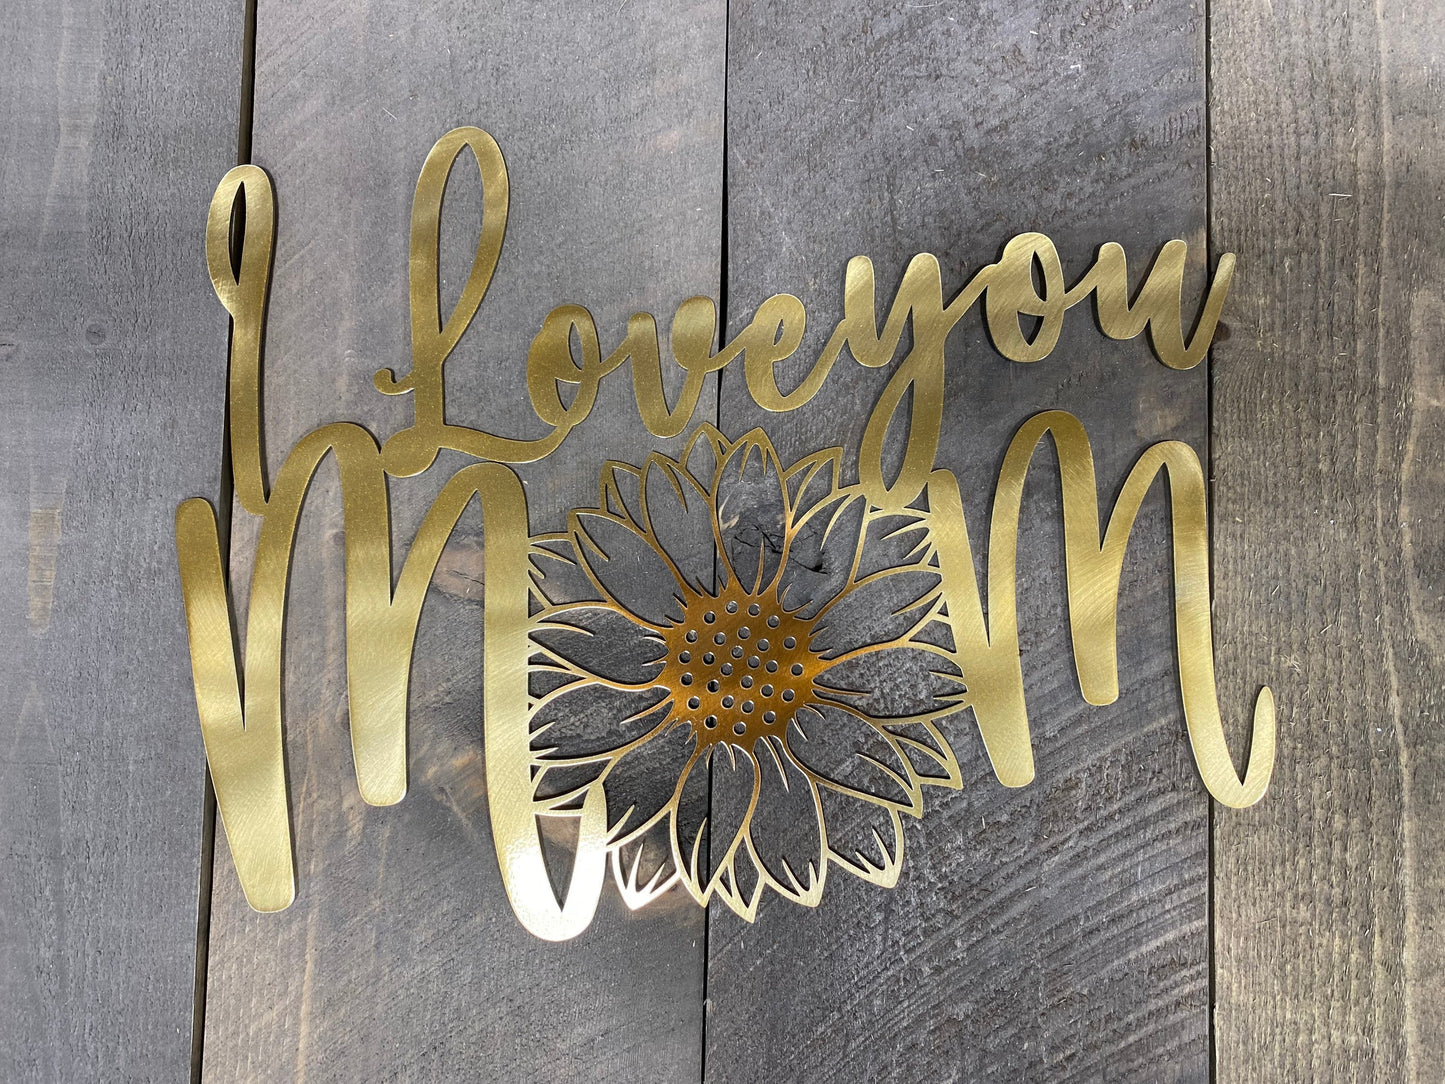 I Love You Mom Sunflower Metal wall art, sunflower home decor, she shed decor, sunflower accent, mom metal wall hanging, gifts for mom